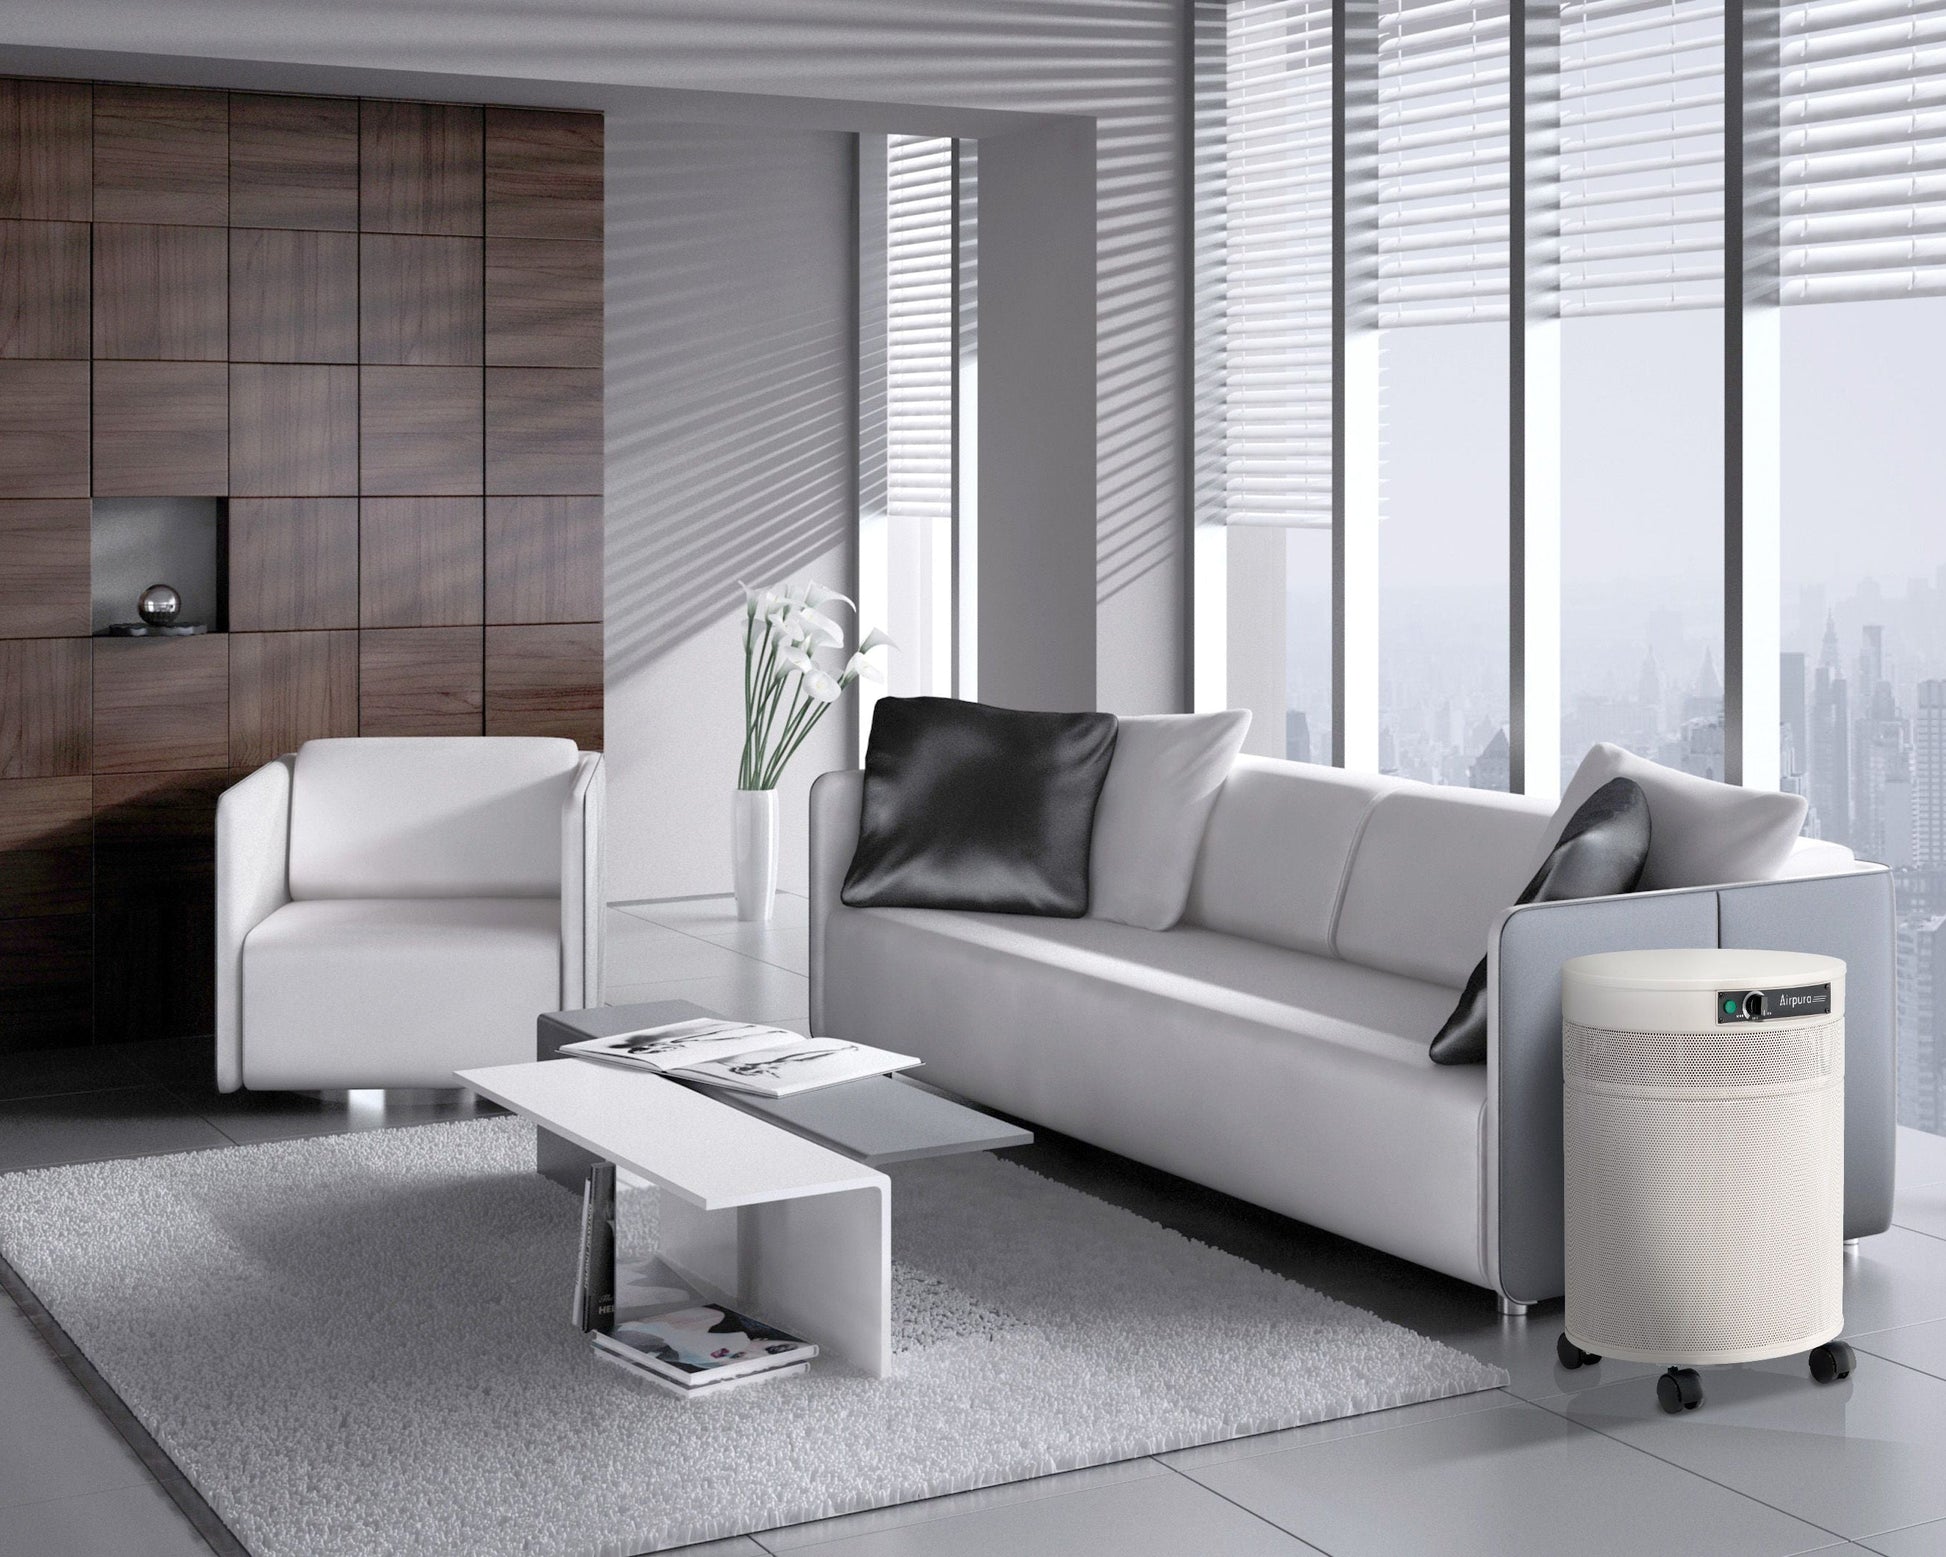  Living room with air purifier from Airpura Industries